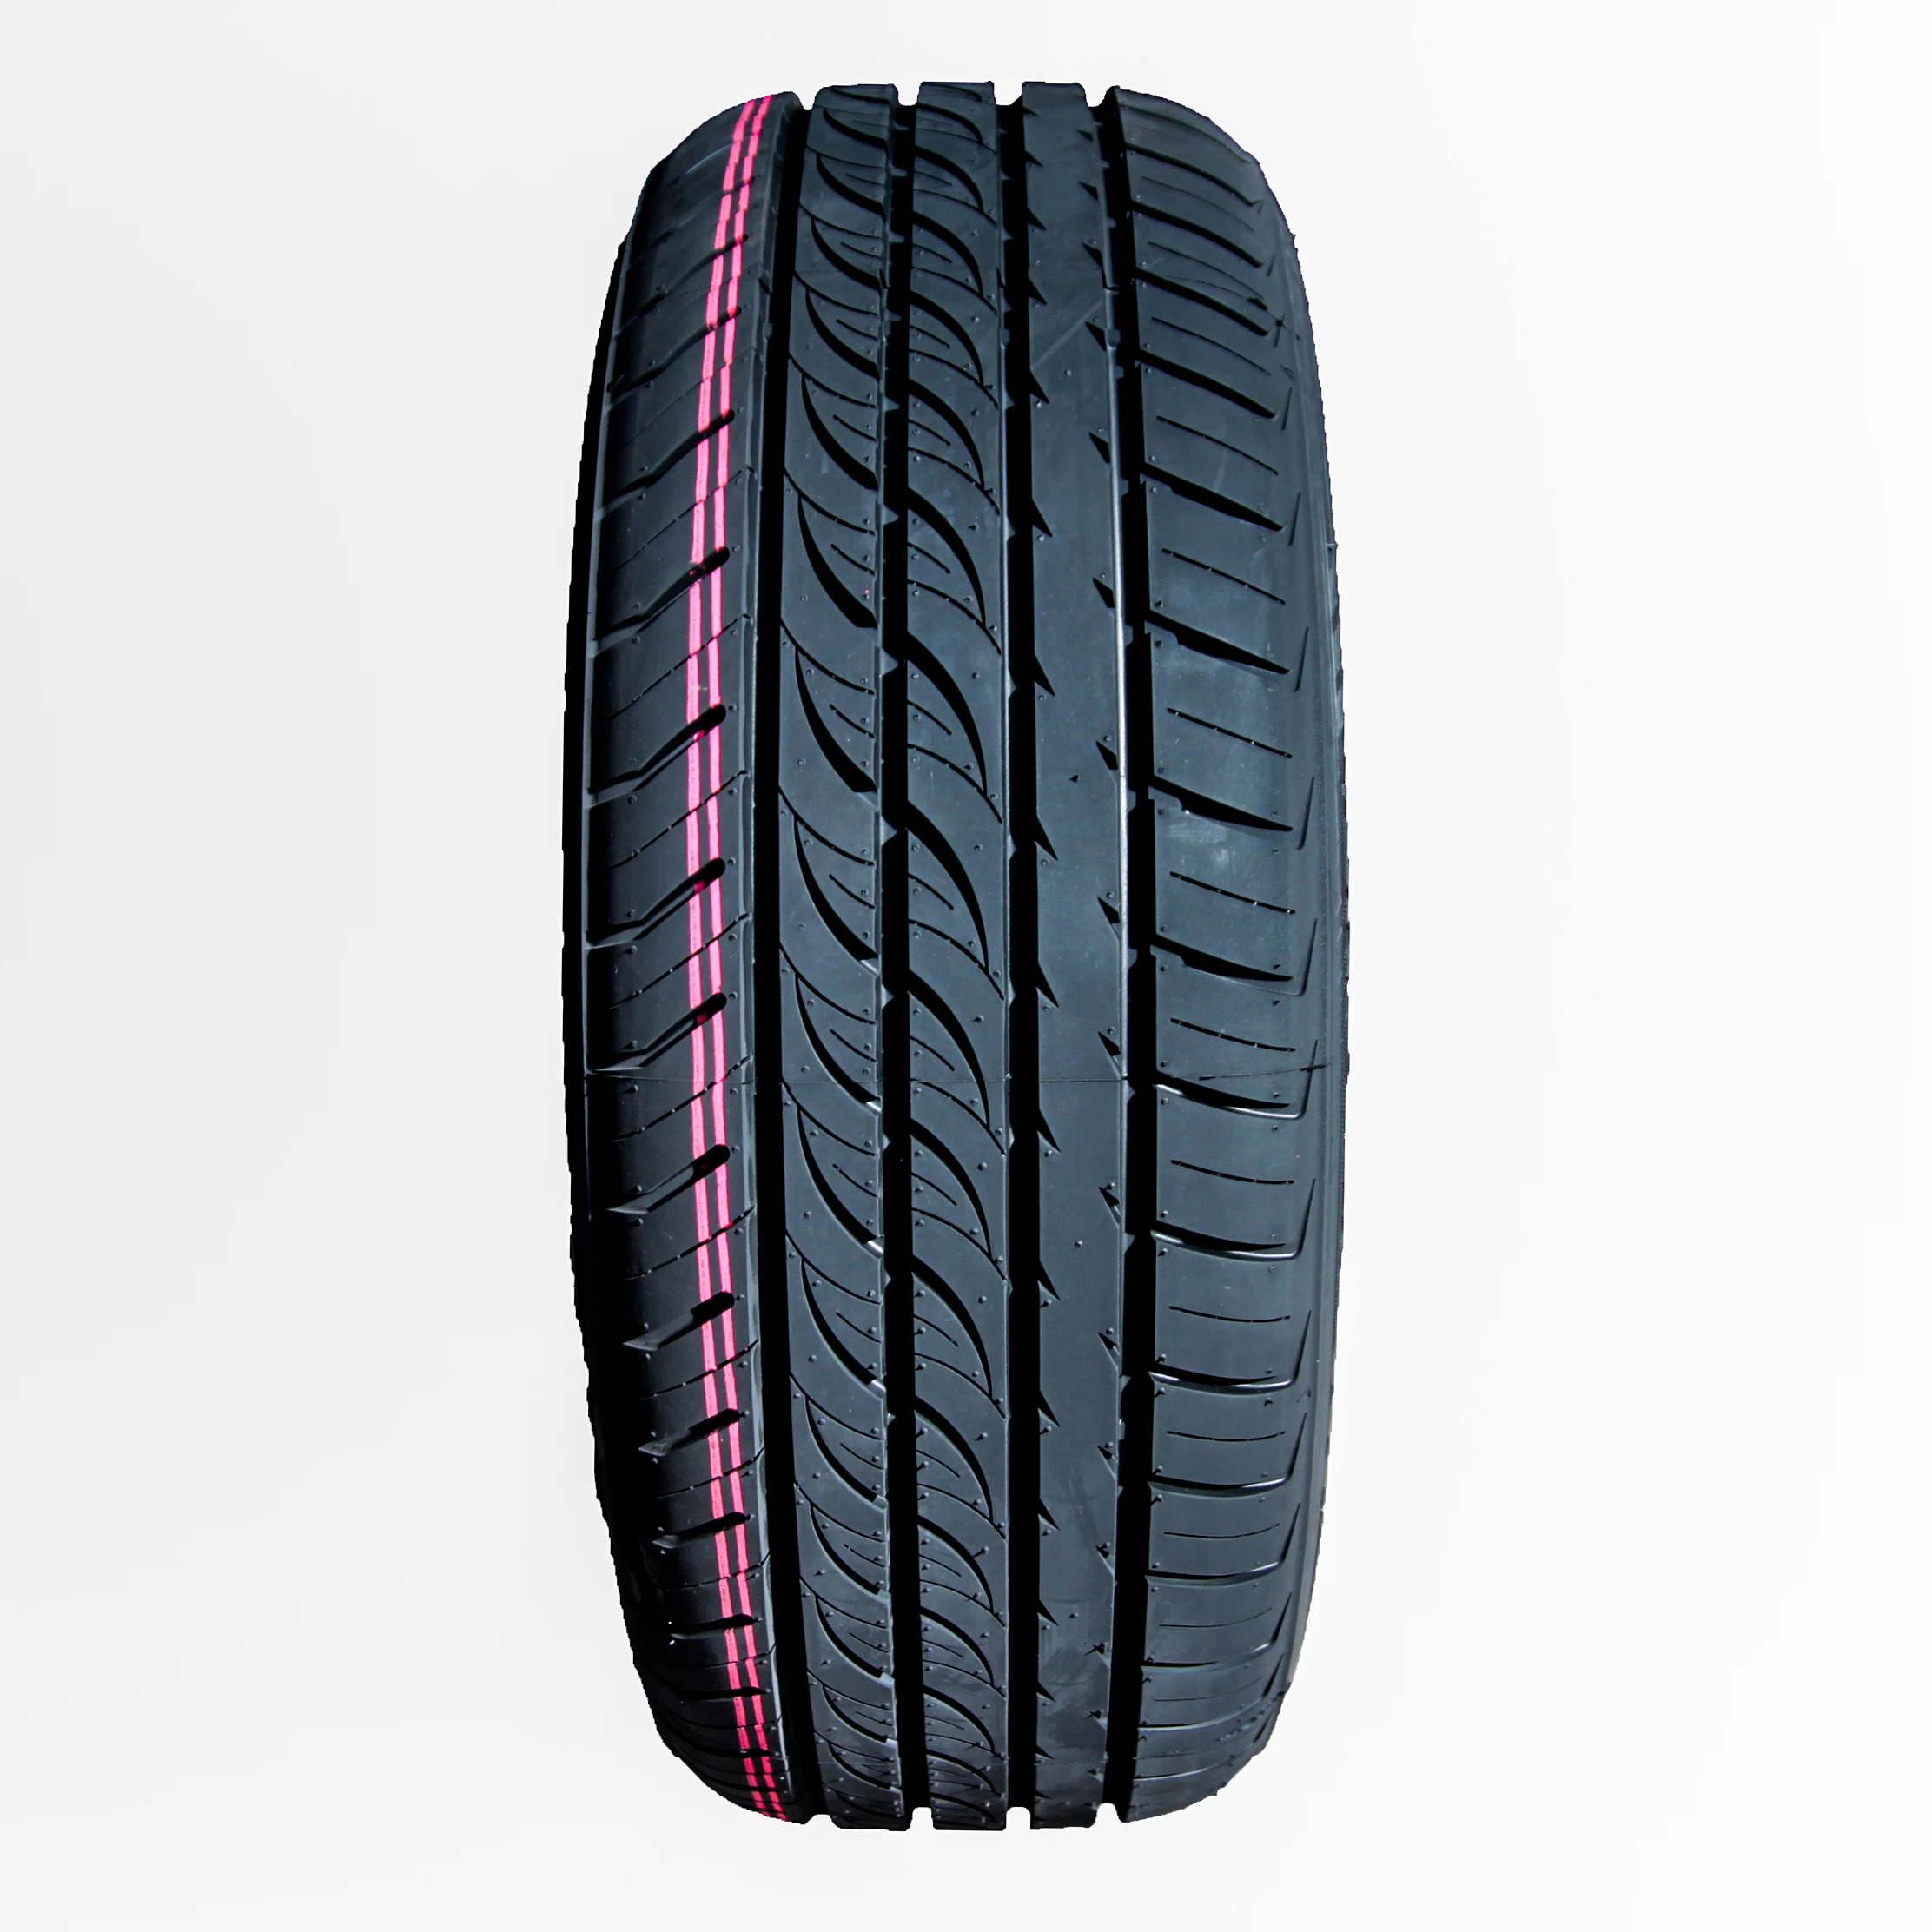 Automobile Tyre New Brand High Quality Green 5 55 R16 Car Tire Buy Automobile Tire 5 55r16 Pcr Tire New Brand Tire 5 55 R16 Car Tire 5 55 R16 Automobile Tire Car Tire